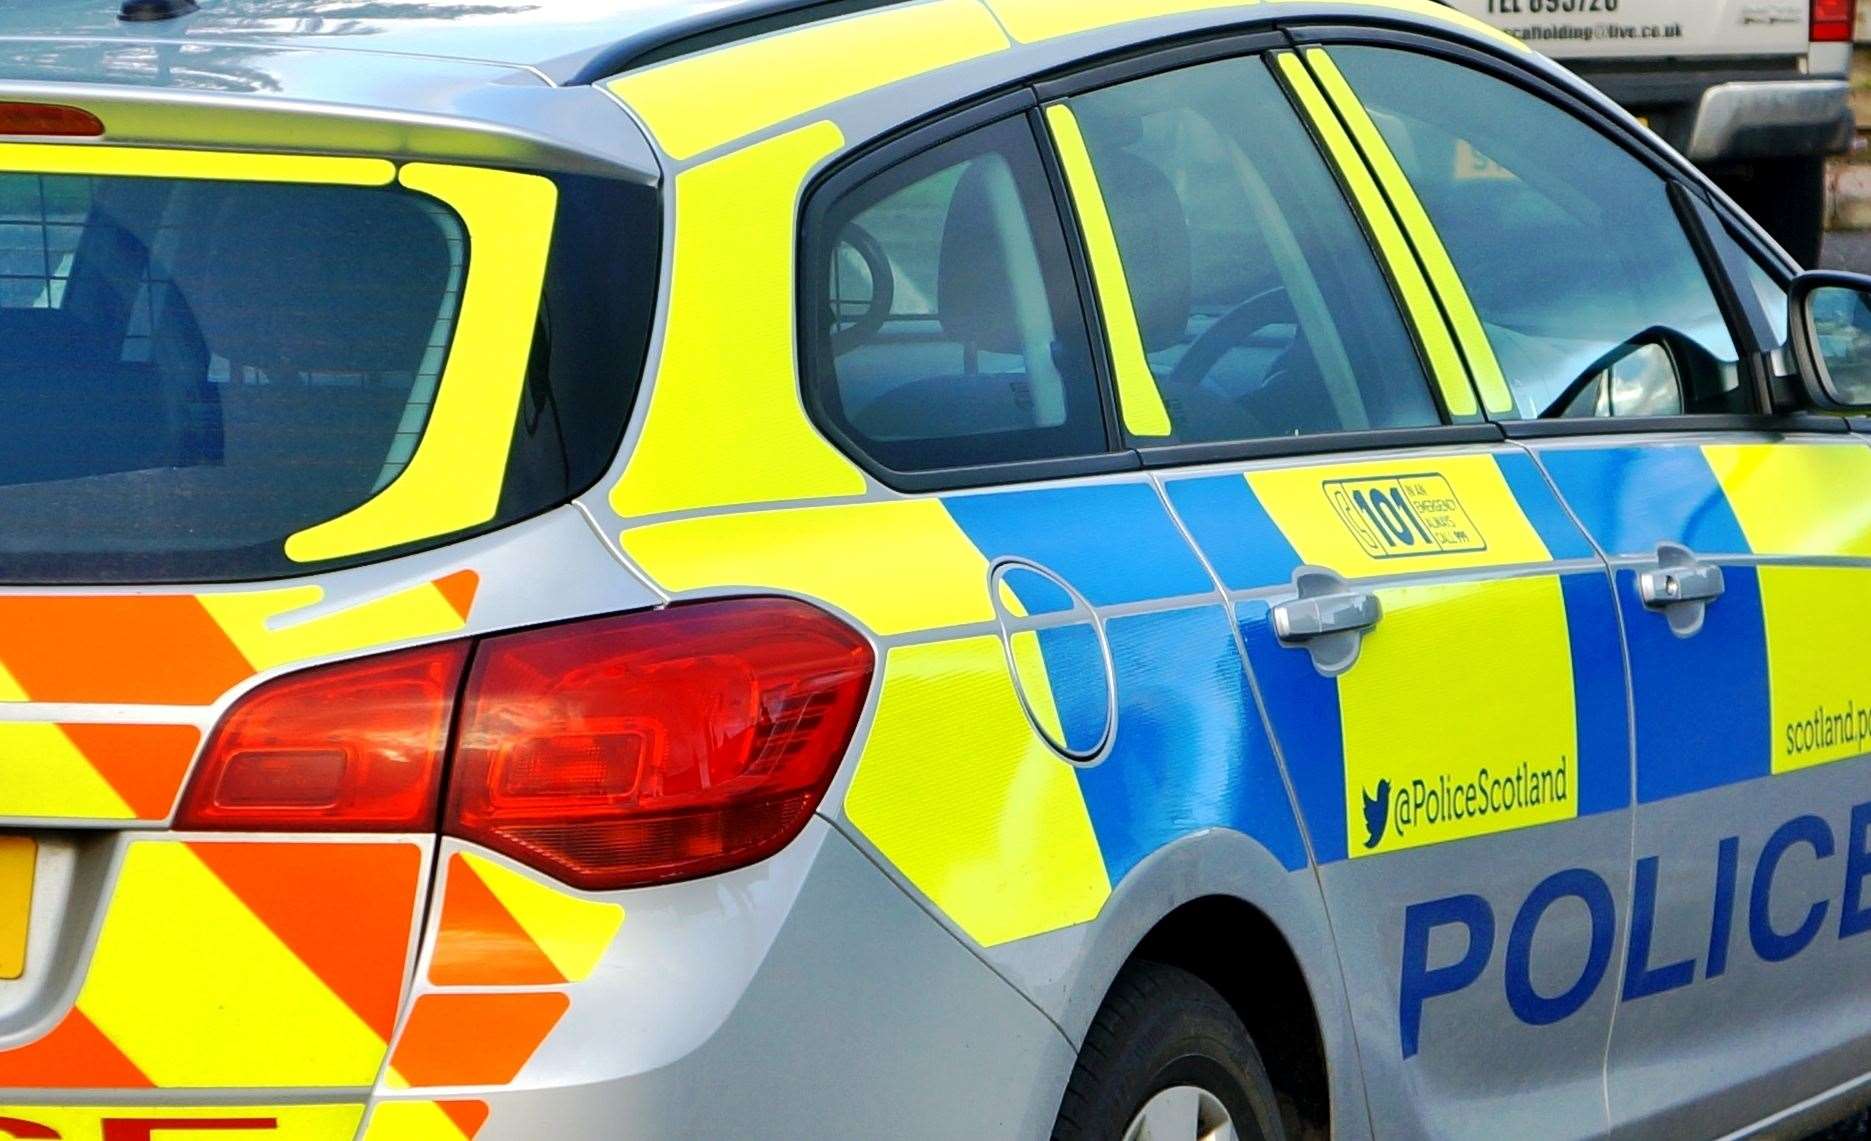 Police have announced that a motorcyclist injured in a collision on the A87 on Friday died today.